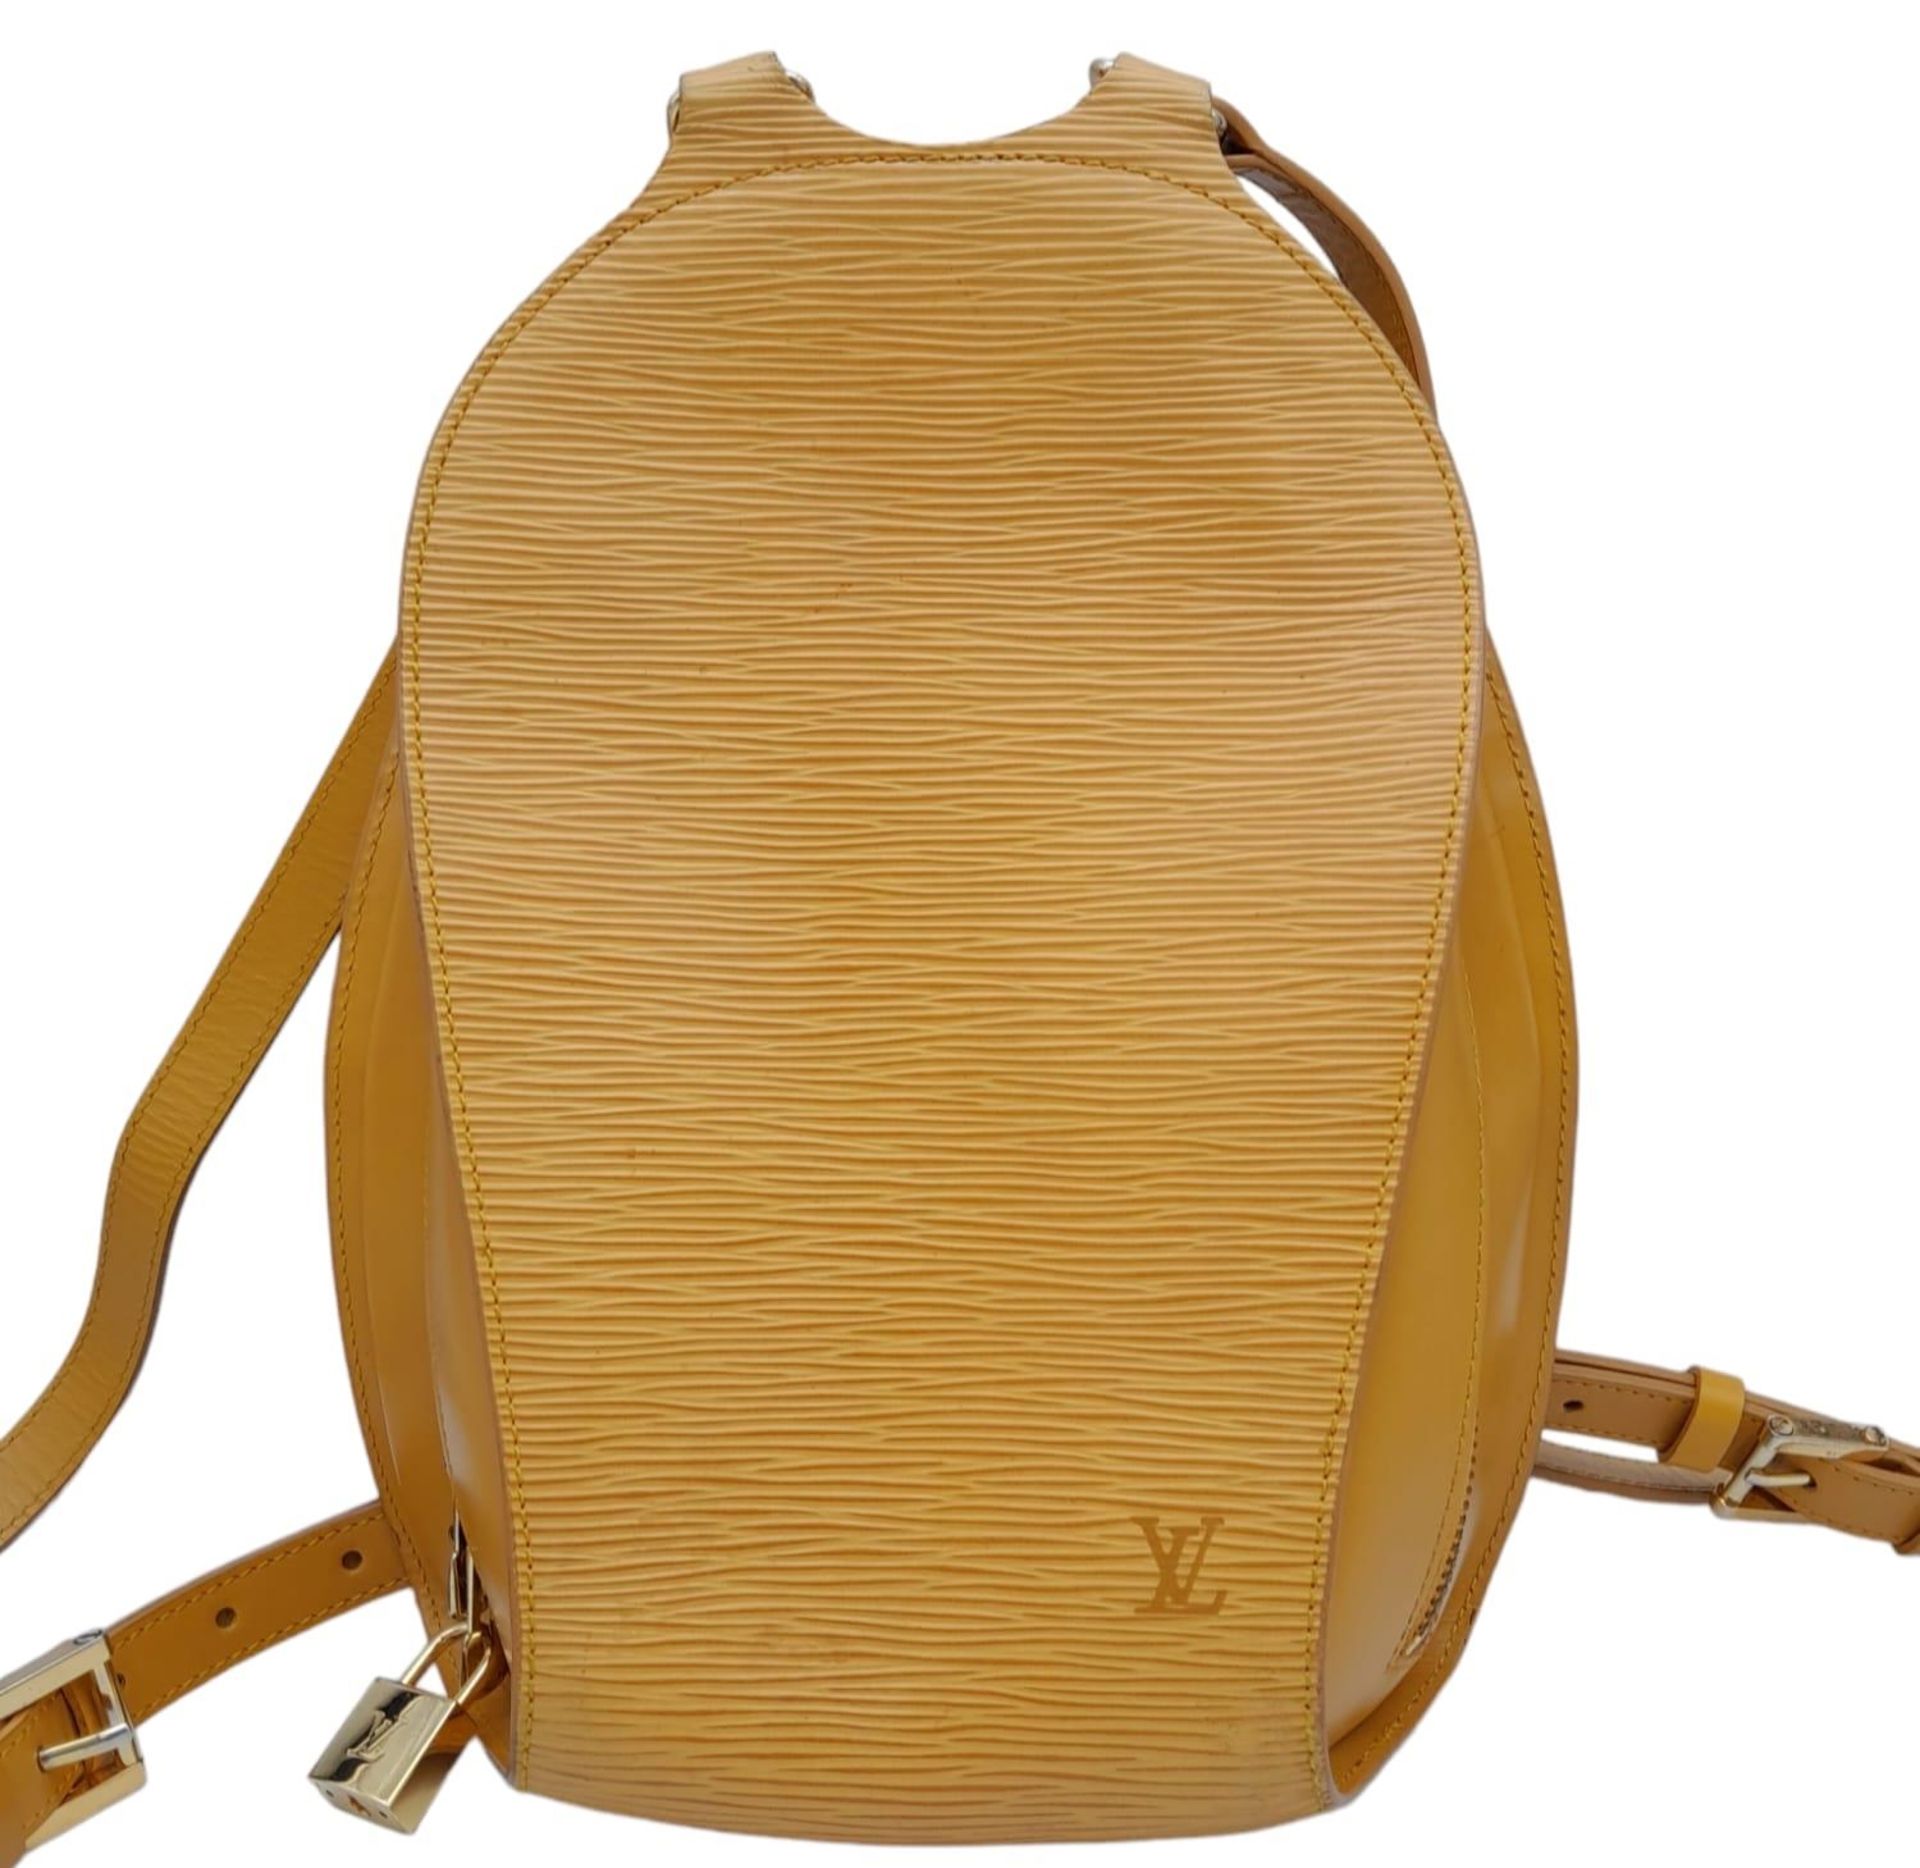 A Louis Vuitton Yellow 'Mabillon' Backpack. Epi leather exterior with gold-toned hardware, the - Bild 2 aus 9